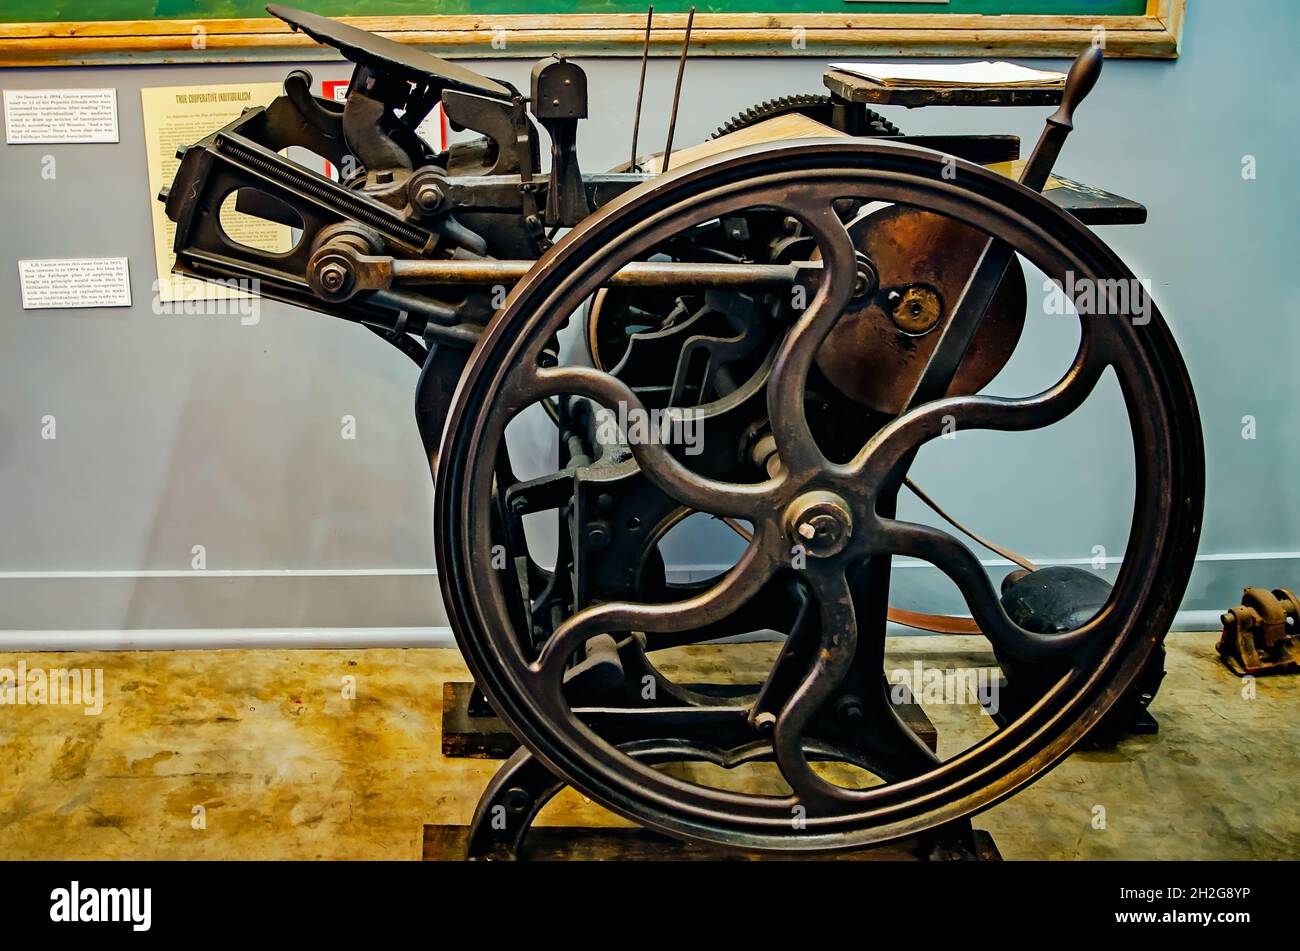 A 1901 Chandler & Price printing press used to print The Fairhope Courier is displayed at the Fairhope Museum of History in Fairhope, Alabama. Stock Photo